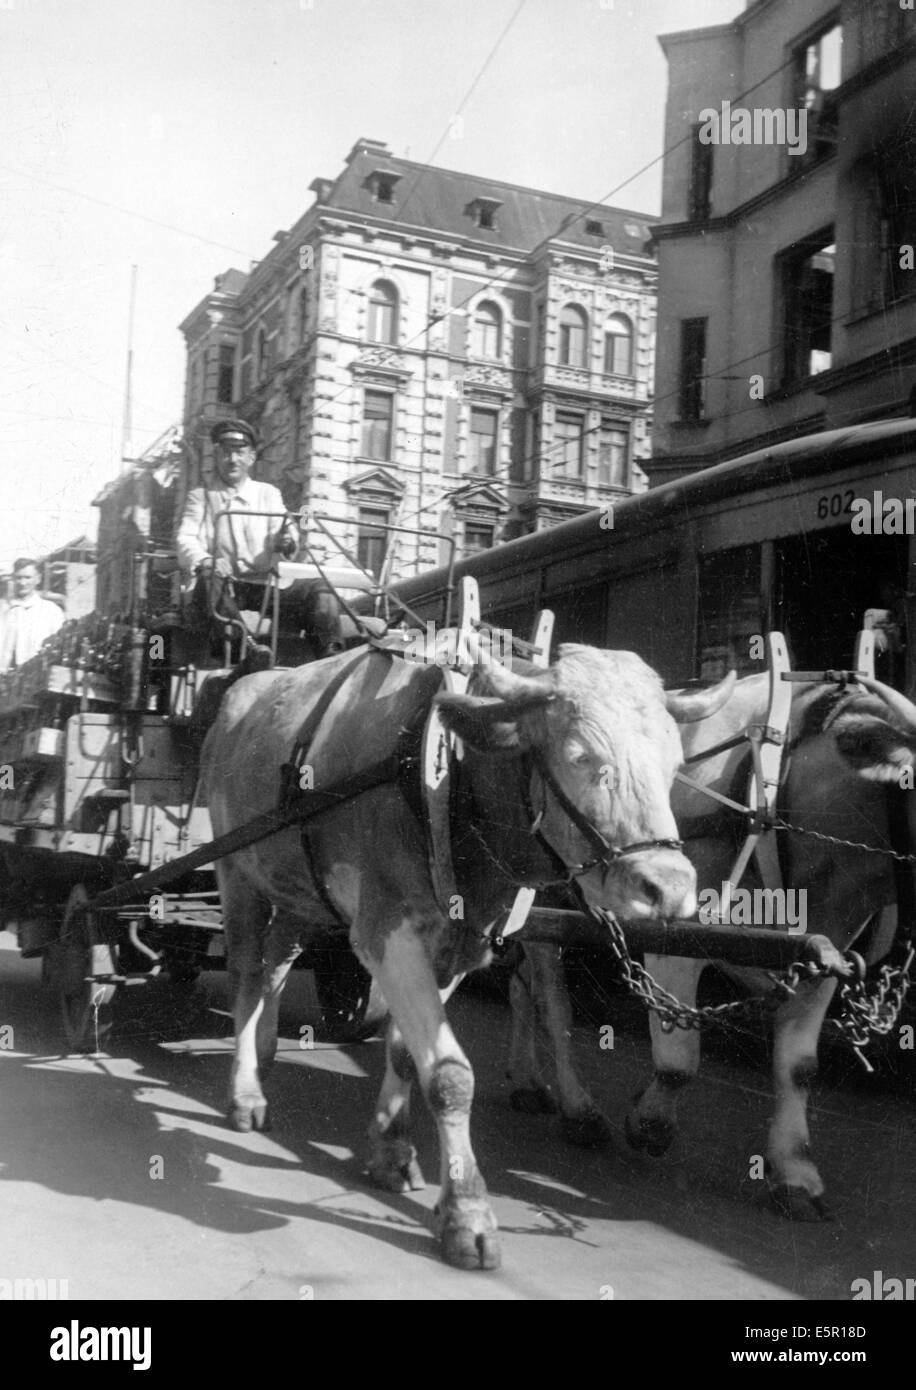 The picture from a Nazi news report shows a oxen pulling  a cart in Berlin, Germany, October 1944. The original text on the back of the picture reads: 'Life in Berlin today - The newest yoke in Berlin: the oxen-drawn wagon. The sturdy brewery horses have been 'drafted' and made way for the mighty oxen.' Fotoarchiv für Zeitgeschichte - NO WIRE SERVICE Stock Photo